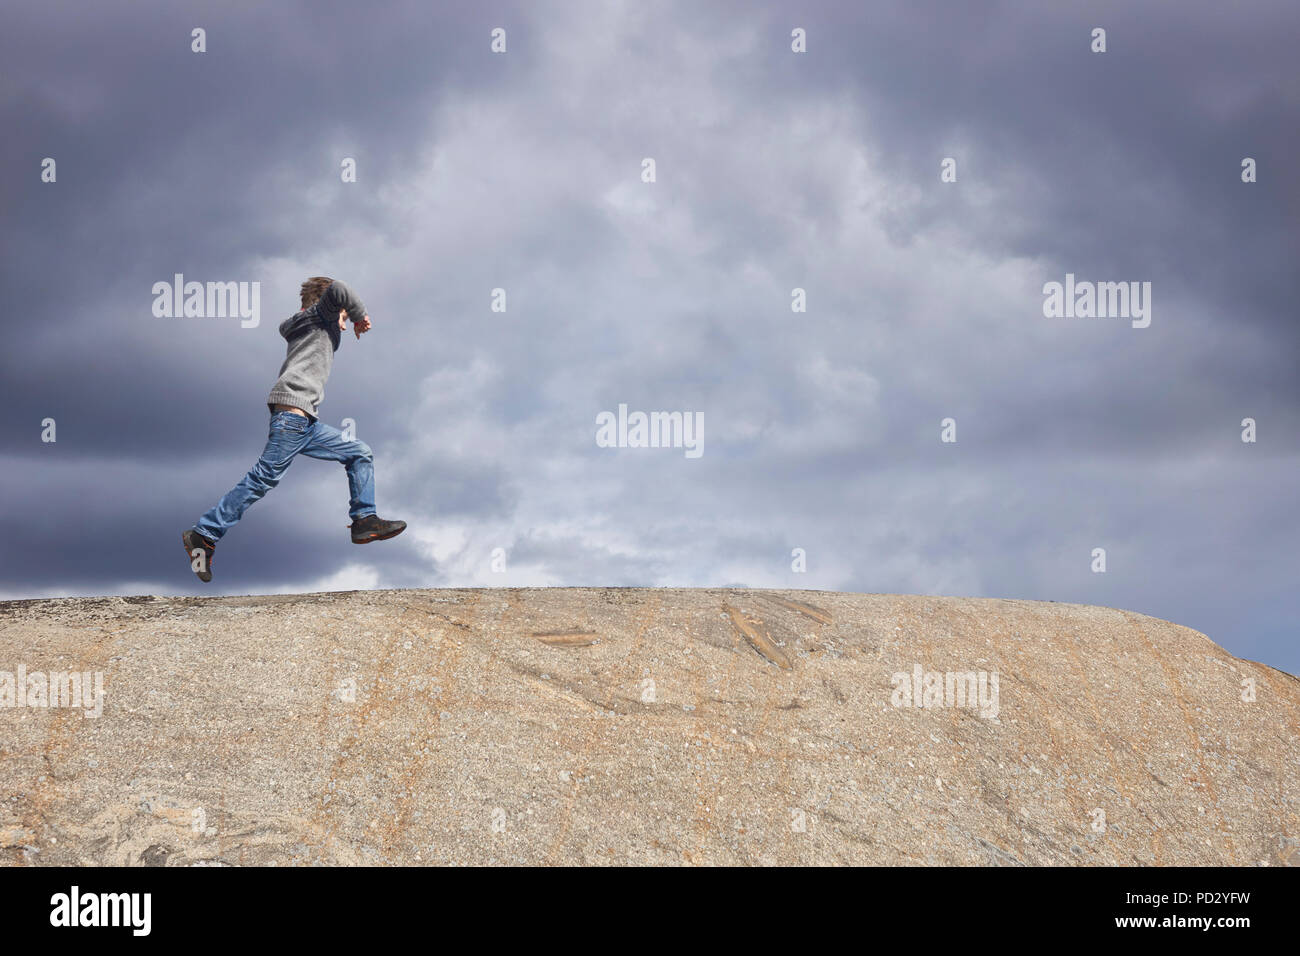 Boy running on top of rock against stormy cloud sky Stock Photo